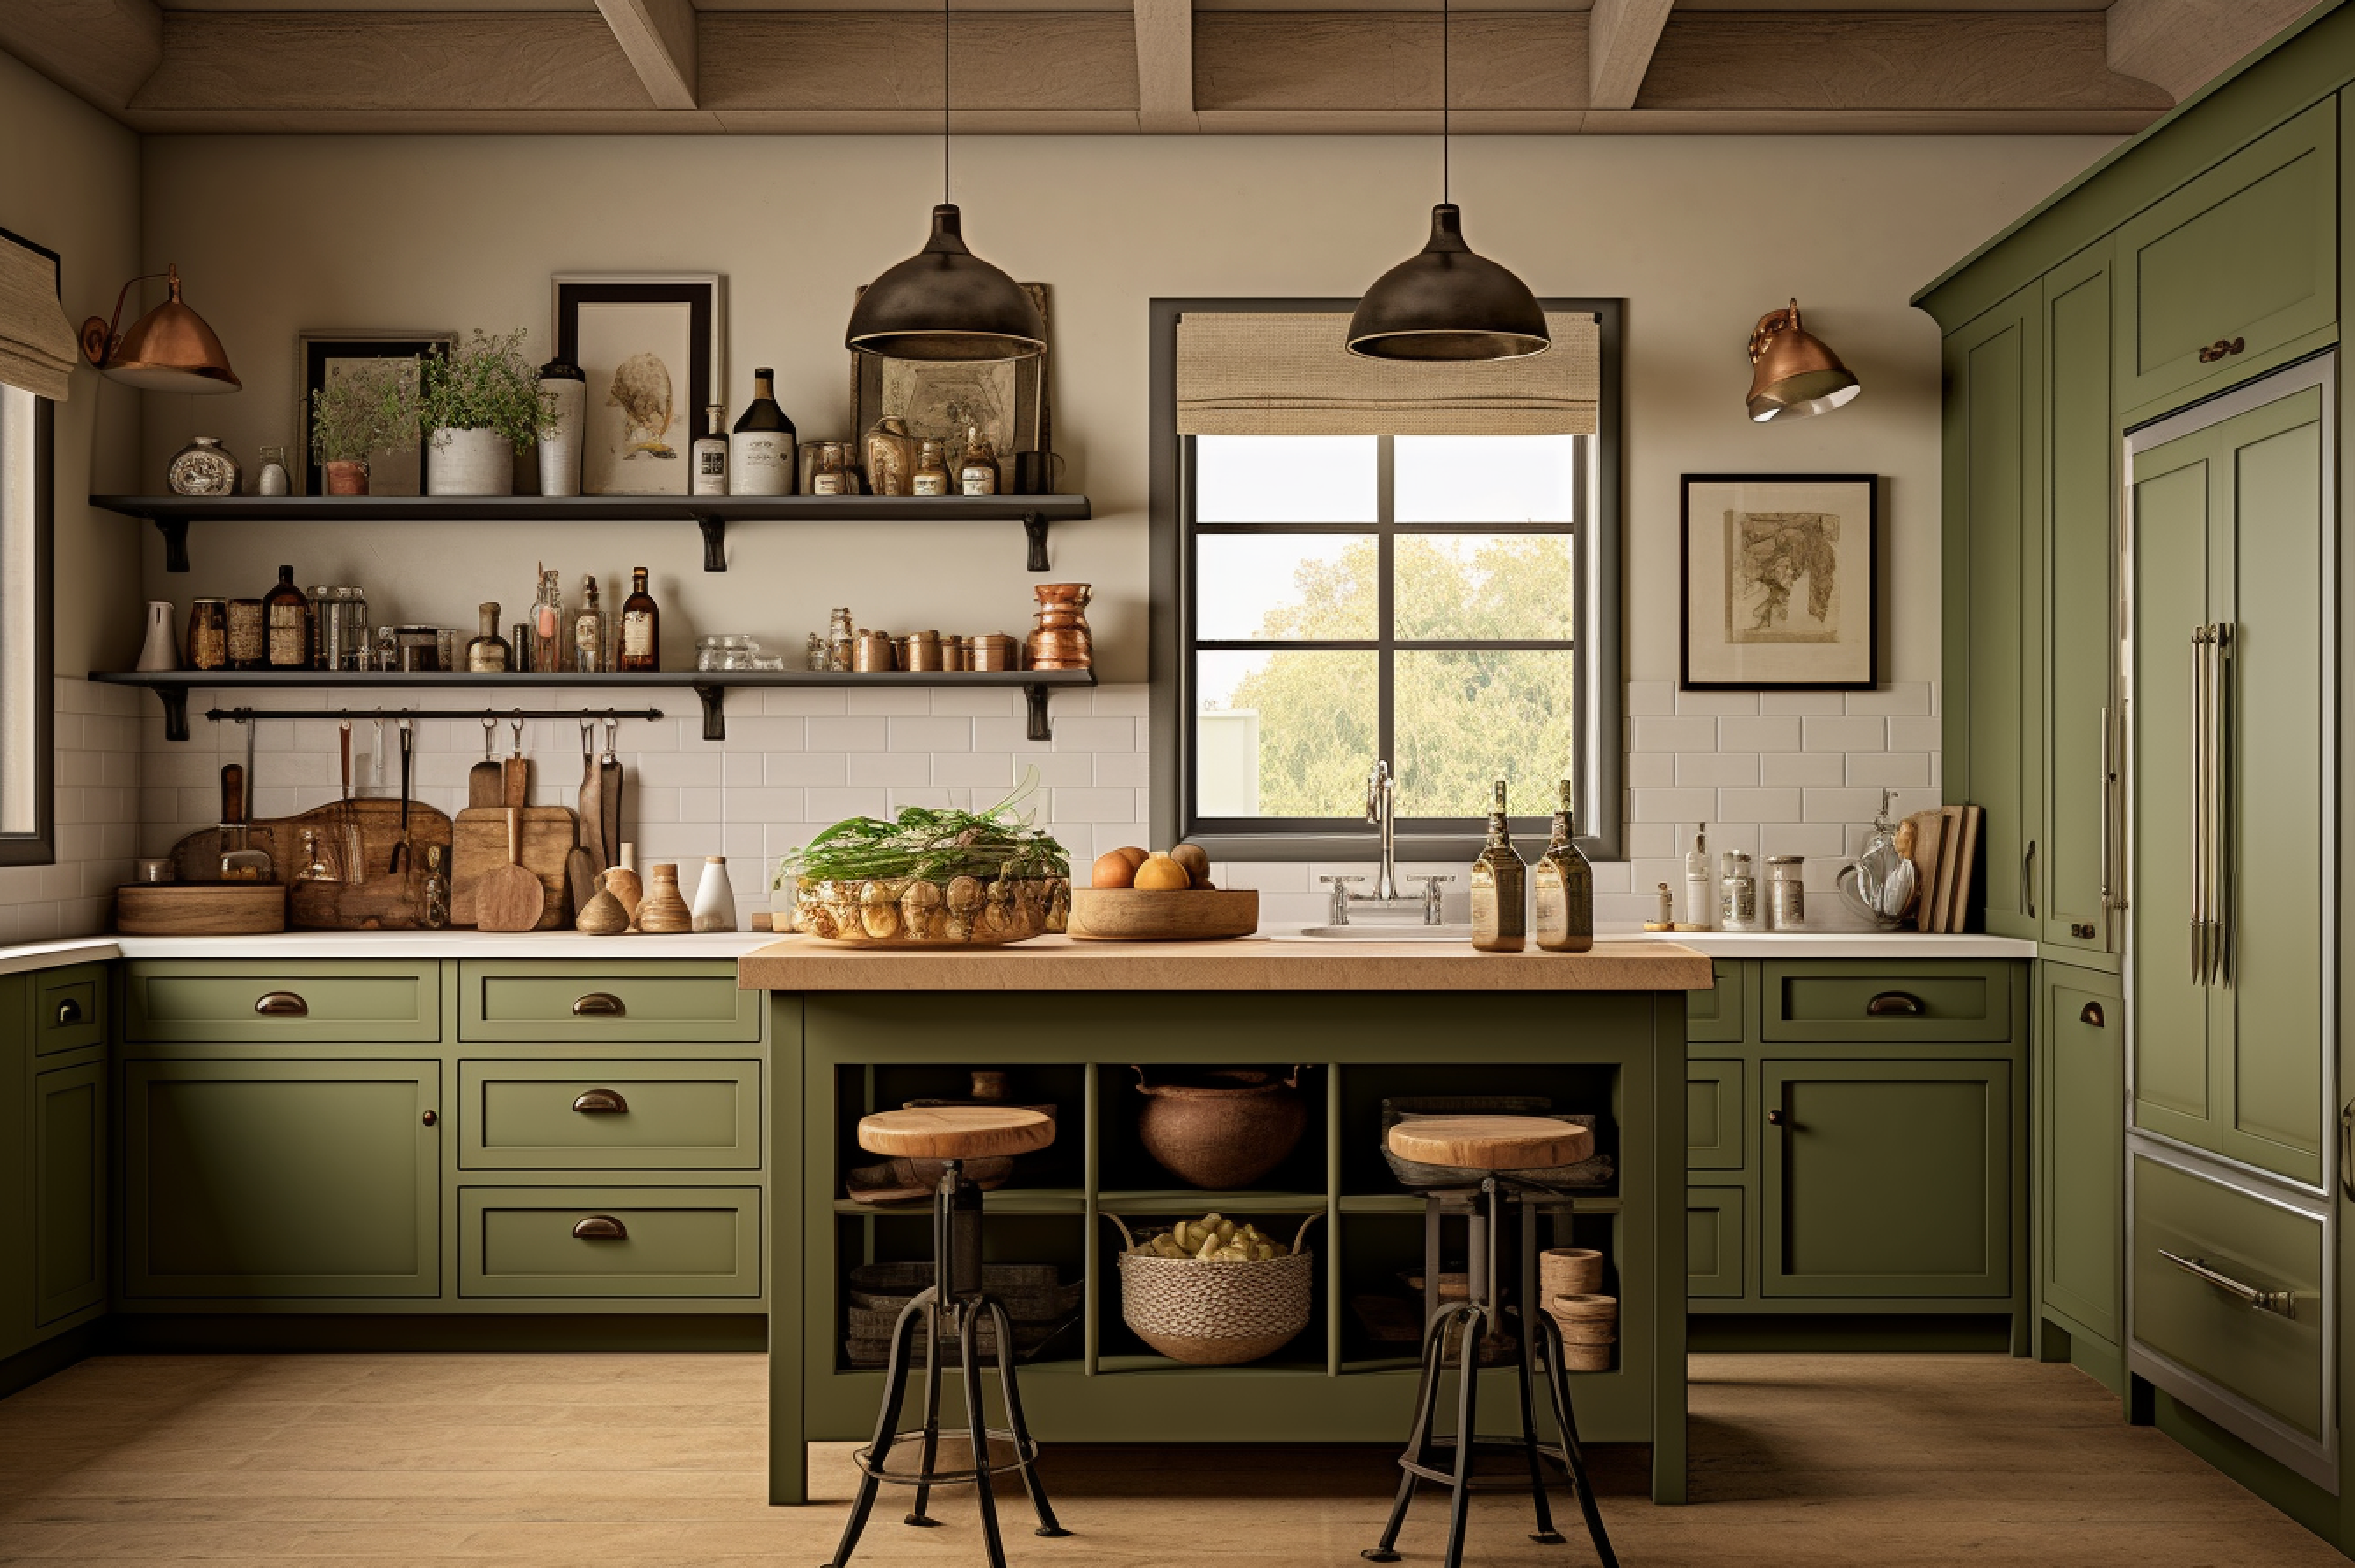 5. Olive Green and Neutral Beige Scheme. A charming farmhouse-style kitchen featuring olive green cabinets and neutral beige walls.